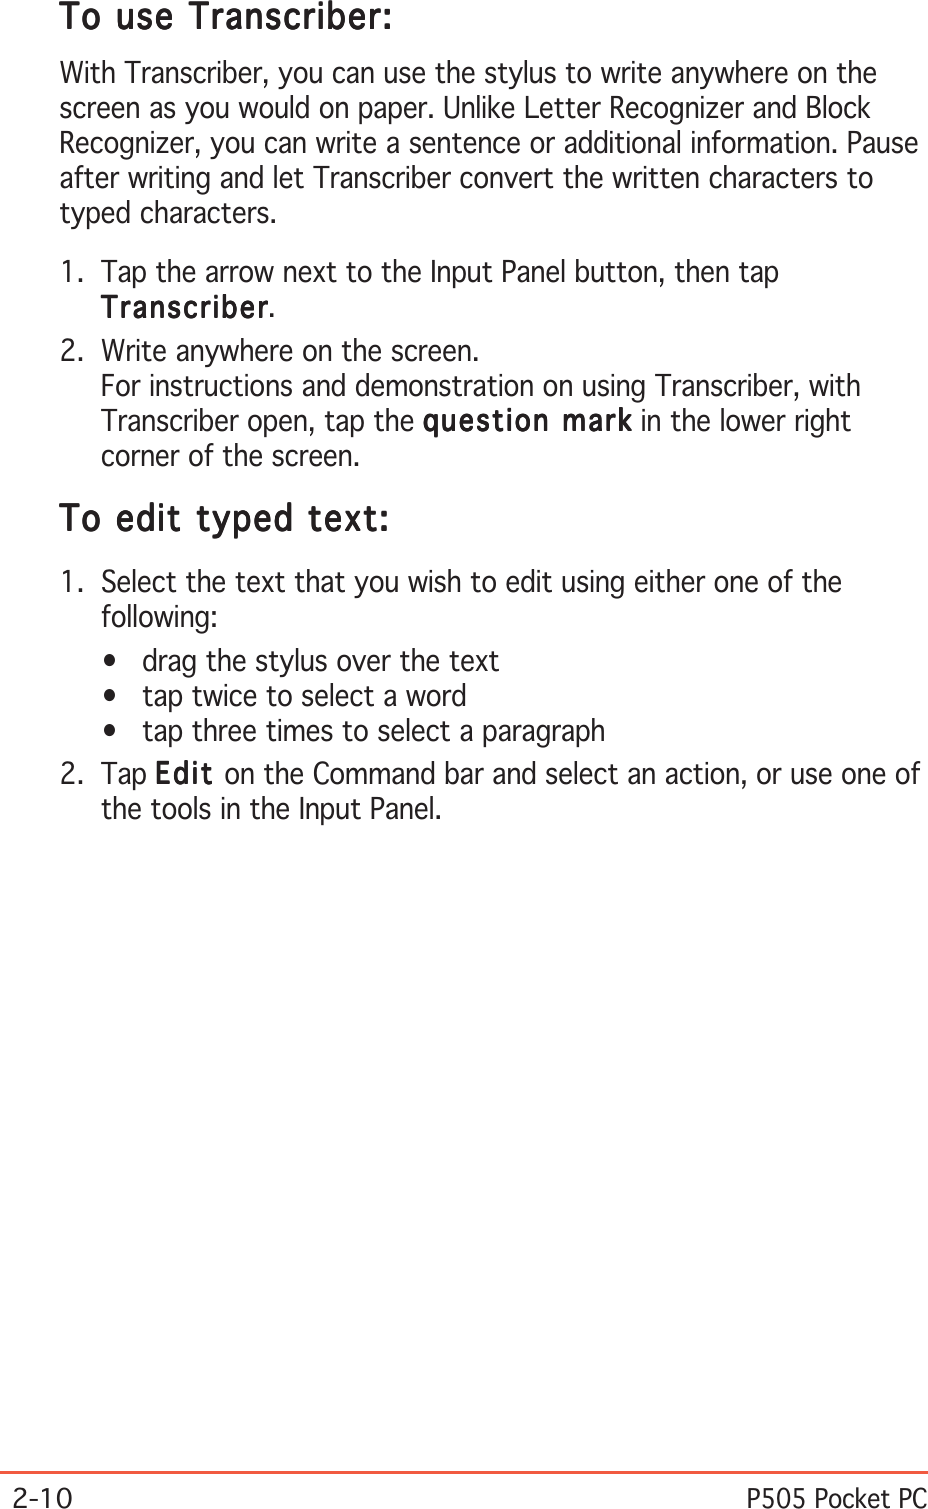 2-10P505 Pocket PCTo use Transcriber:To use Transcriber:To use Transcriber:To use Transcriber:To use Transcriber:With Transcriber, you can use the stylus to write anywhere on thescreen as you would on paper. Unlike Letter Recognizer and BlockRecognizer, you can write a sentence or additional information. Pauseafter writing and let Transcriber convert the written characters totyped characters.1. Tap the arrow next to the Input Panel button, then tapTranscriberTranscriberTranscriberTranscriberTranscriber.2. Write anywhere on the screen.For instructions and demonstration on using Transcriber, withTranscriber open, tap the question markquestion markquestion markquestion markquestion mark in the lower rightcorner of the screen.To edit typed text:To edit typed text:To edit typed text:To edit typed text:To edit typed text:1. Select the text that you wish to edit using either one of thefollowing:• drag the stylus over the text• tap twice to select a word• tap three times to select a paragraph2. Tap EditEditEditEditEd i t on the Command bar and select an action, or use one ofthe tools in the Input Panel.